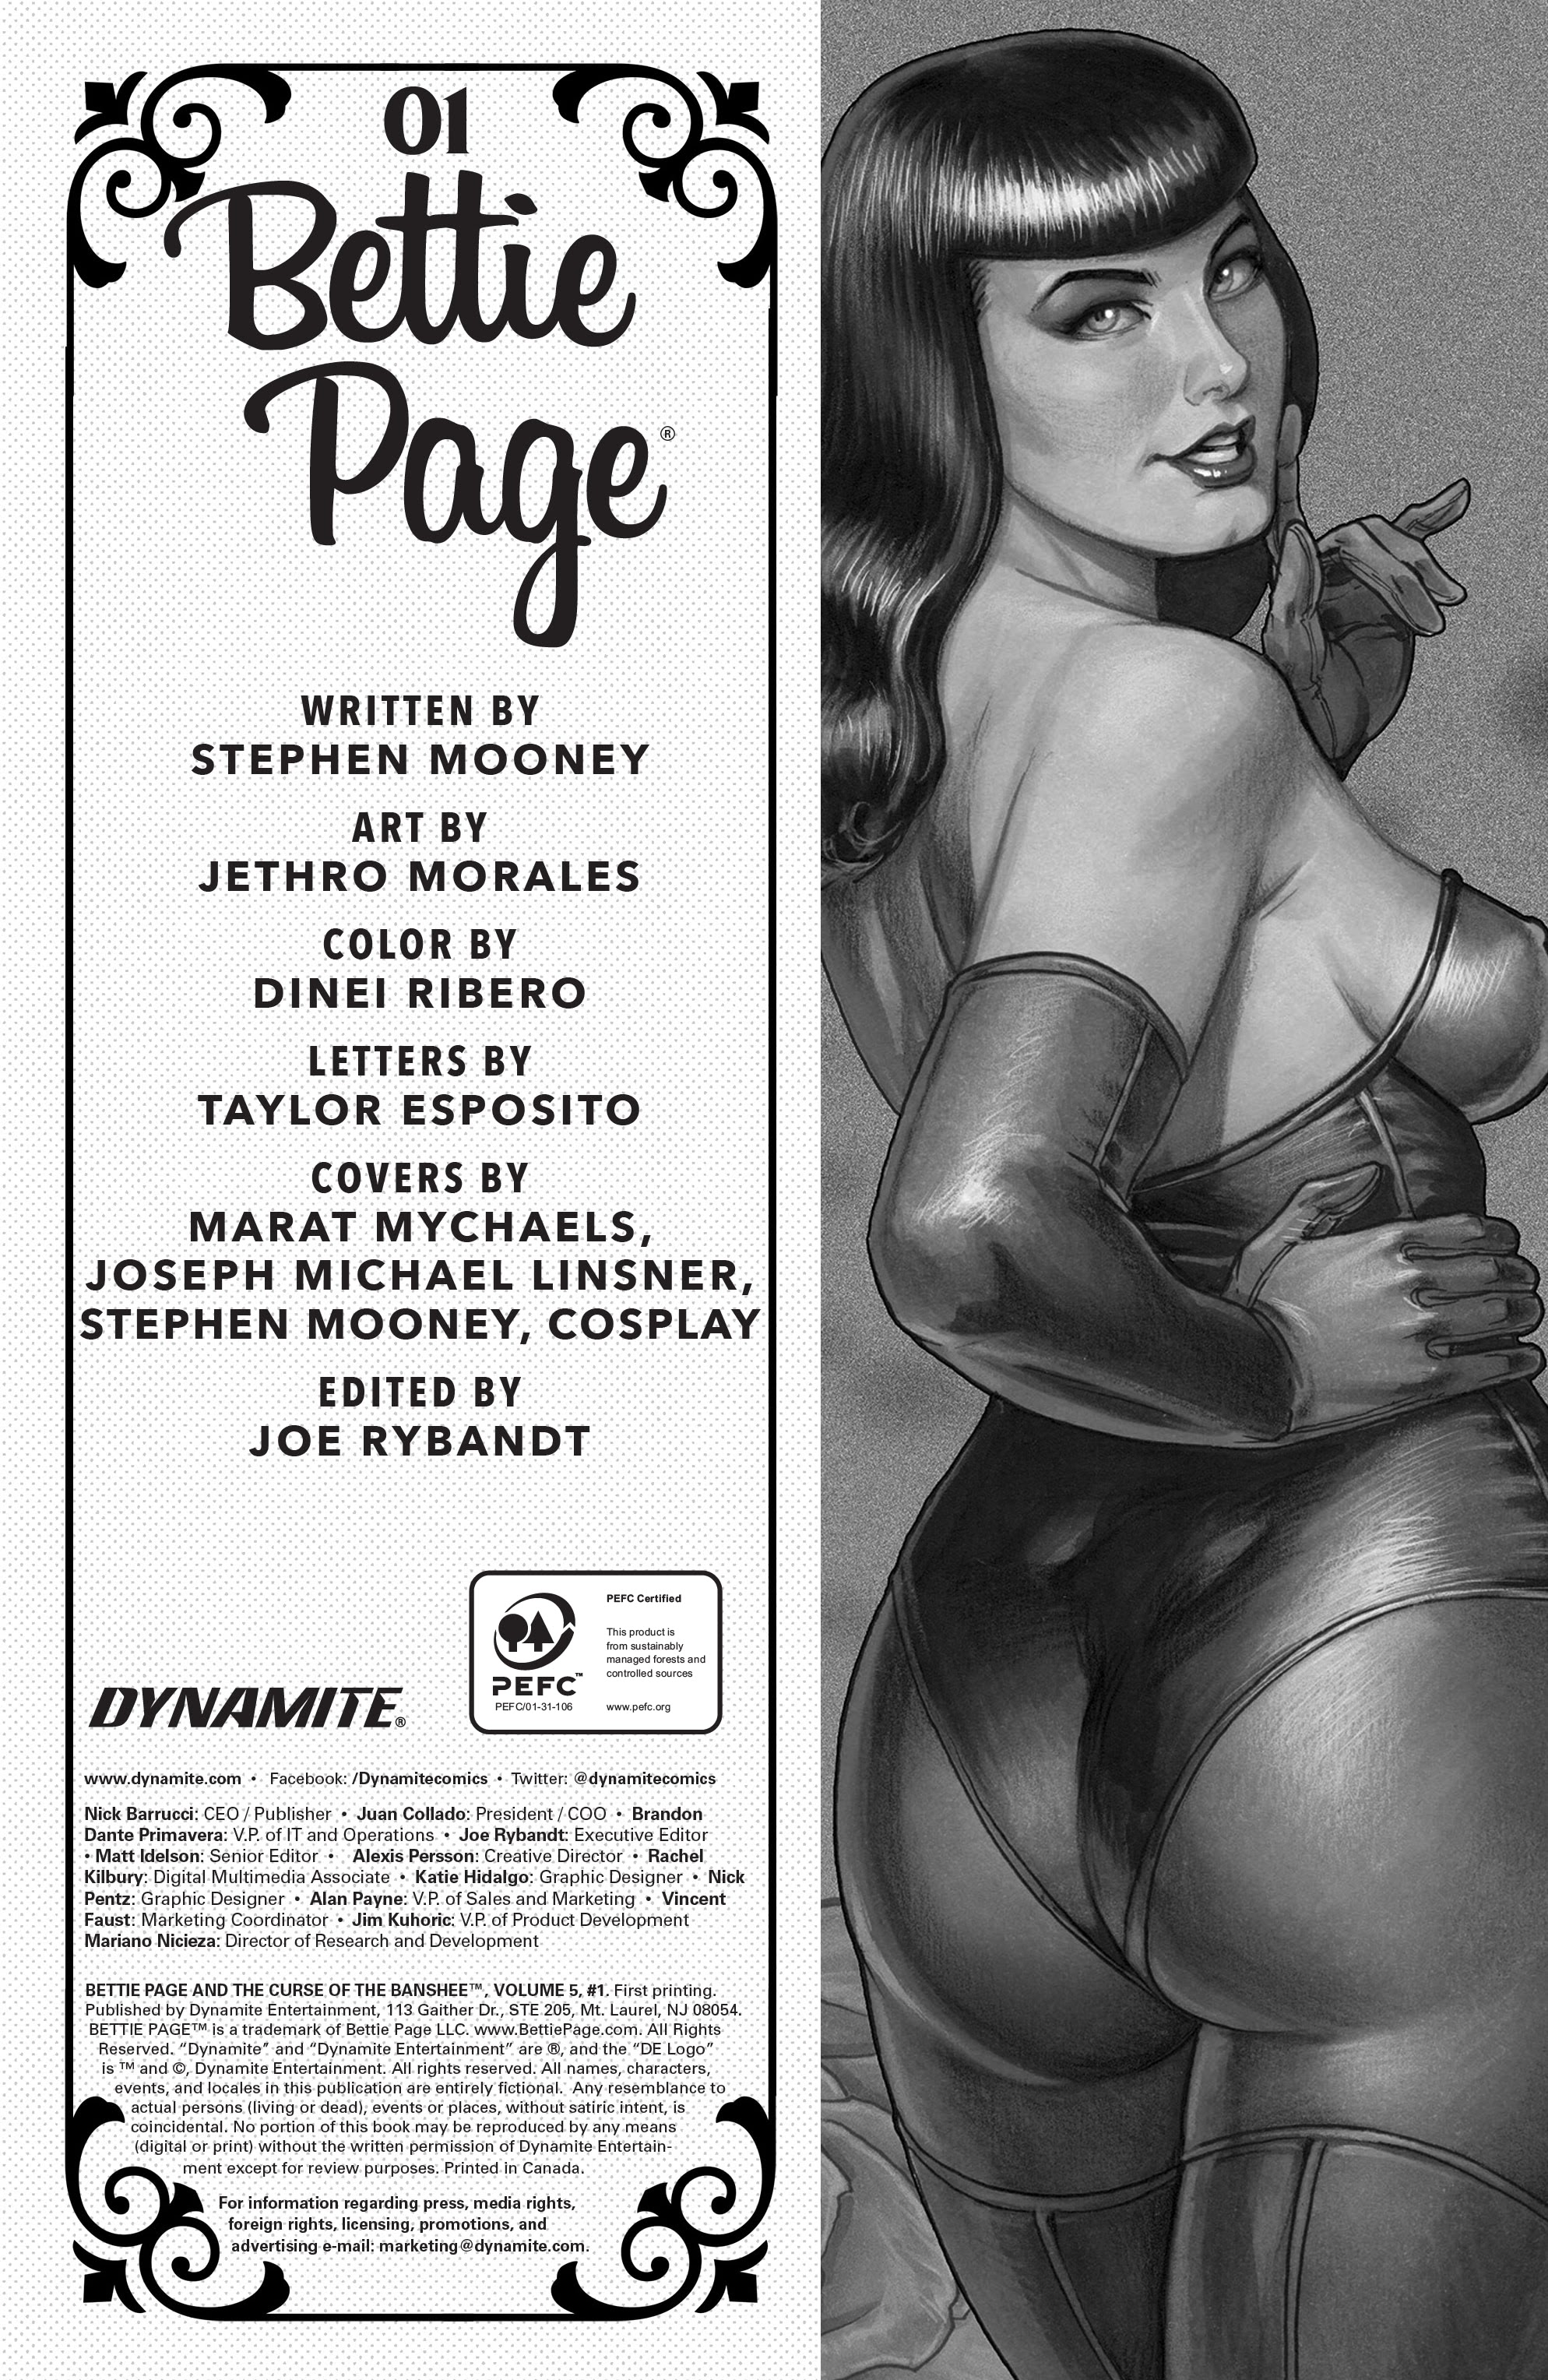 Read online Bettie Page & The Curse of the Banshee comic -  Issue #1 - 6